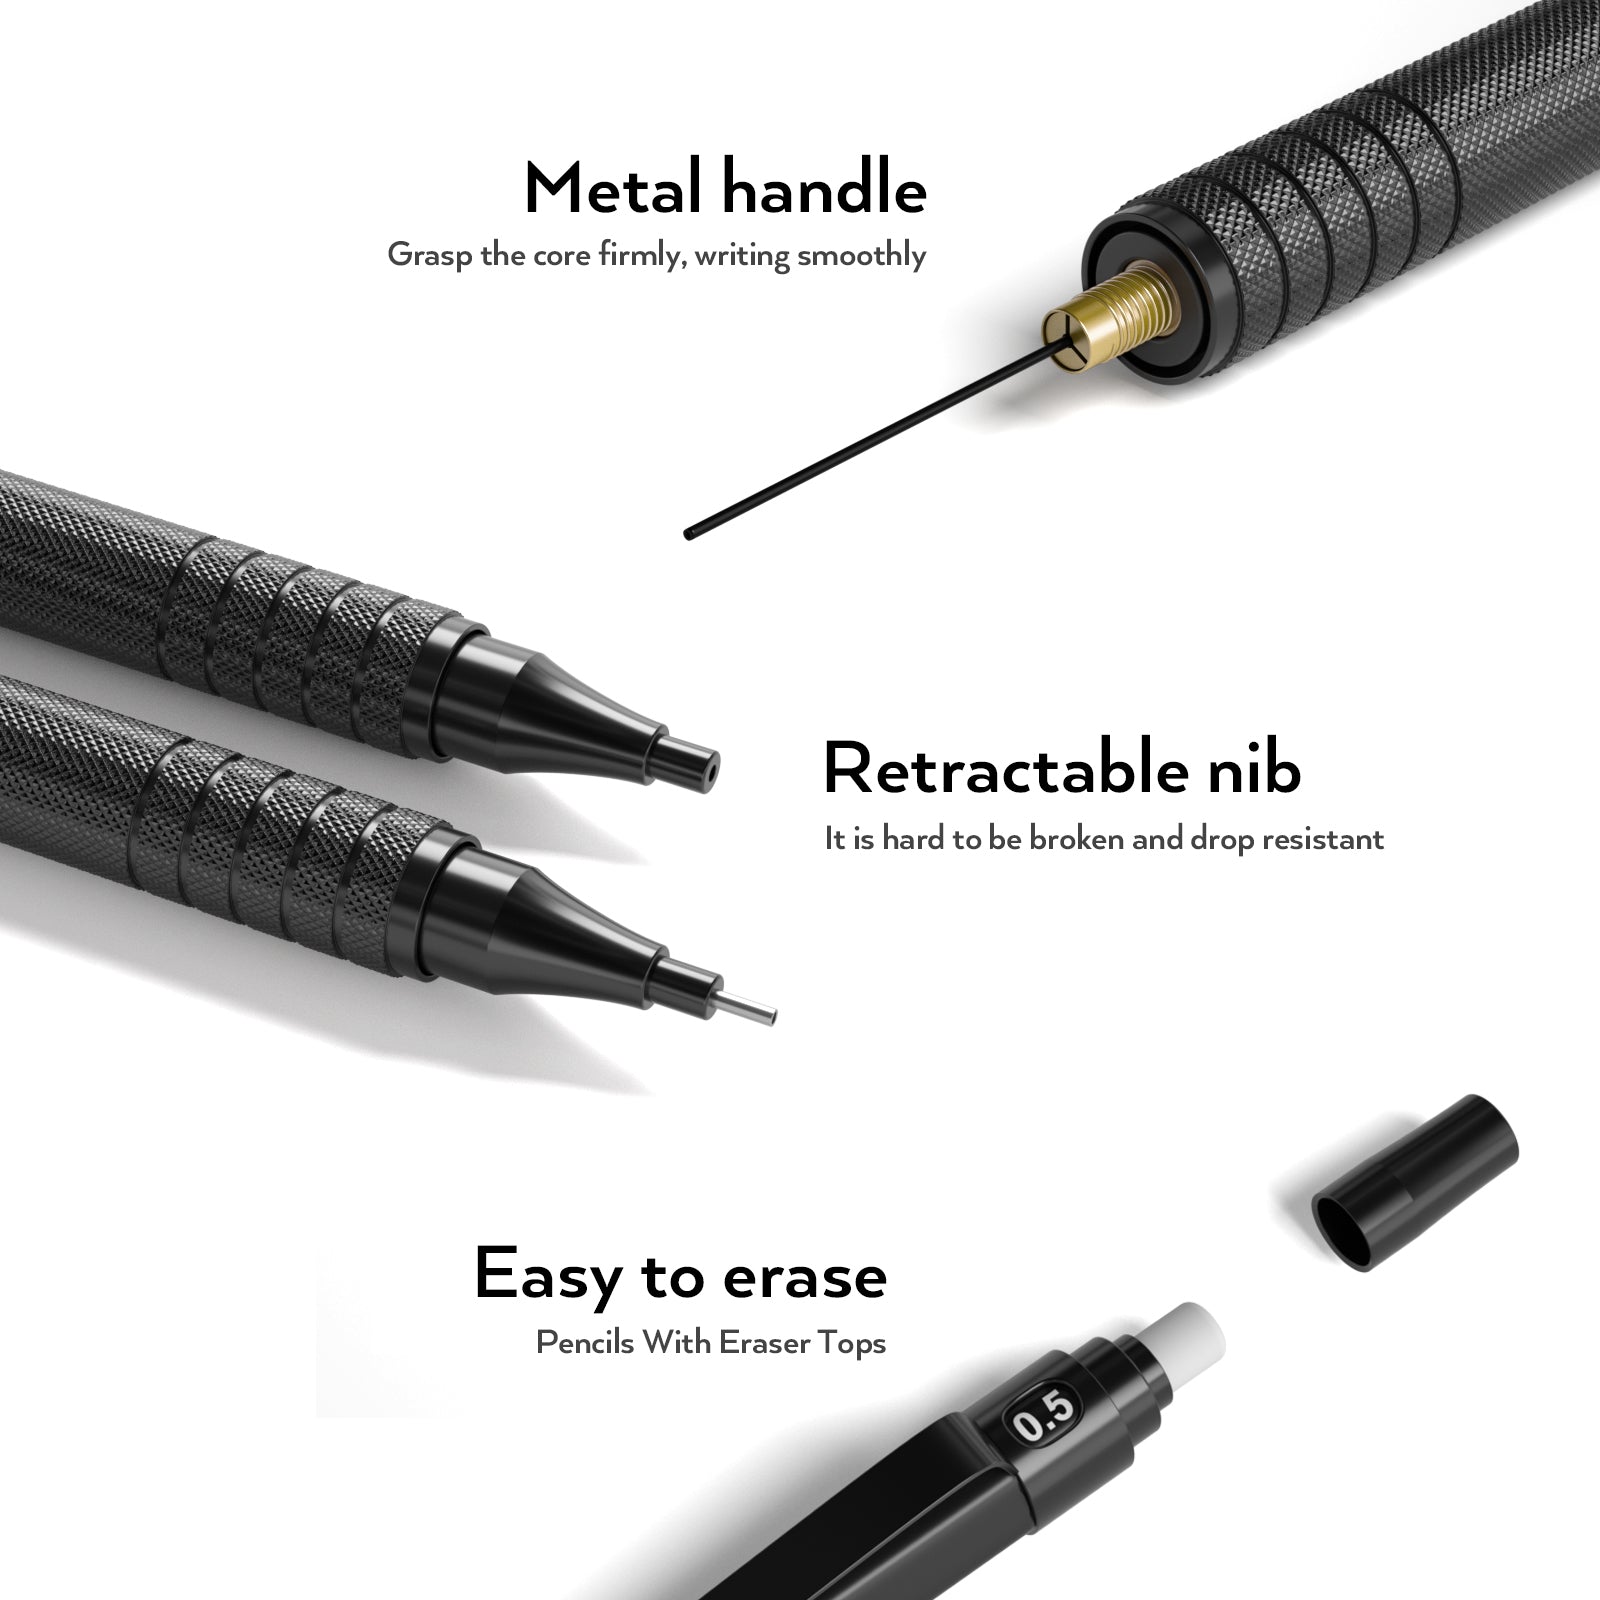 Mr. Pen- Mechanical Pencil Set with Leads and Eraser Refills, 5